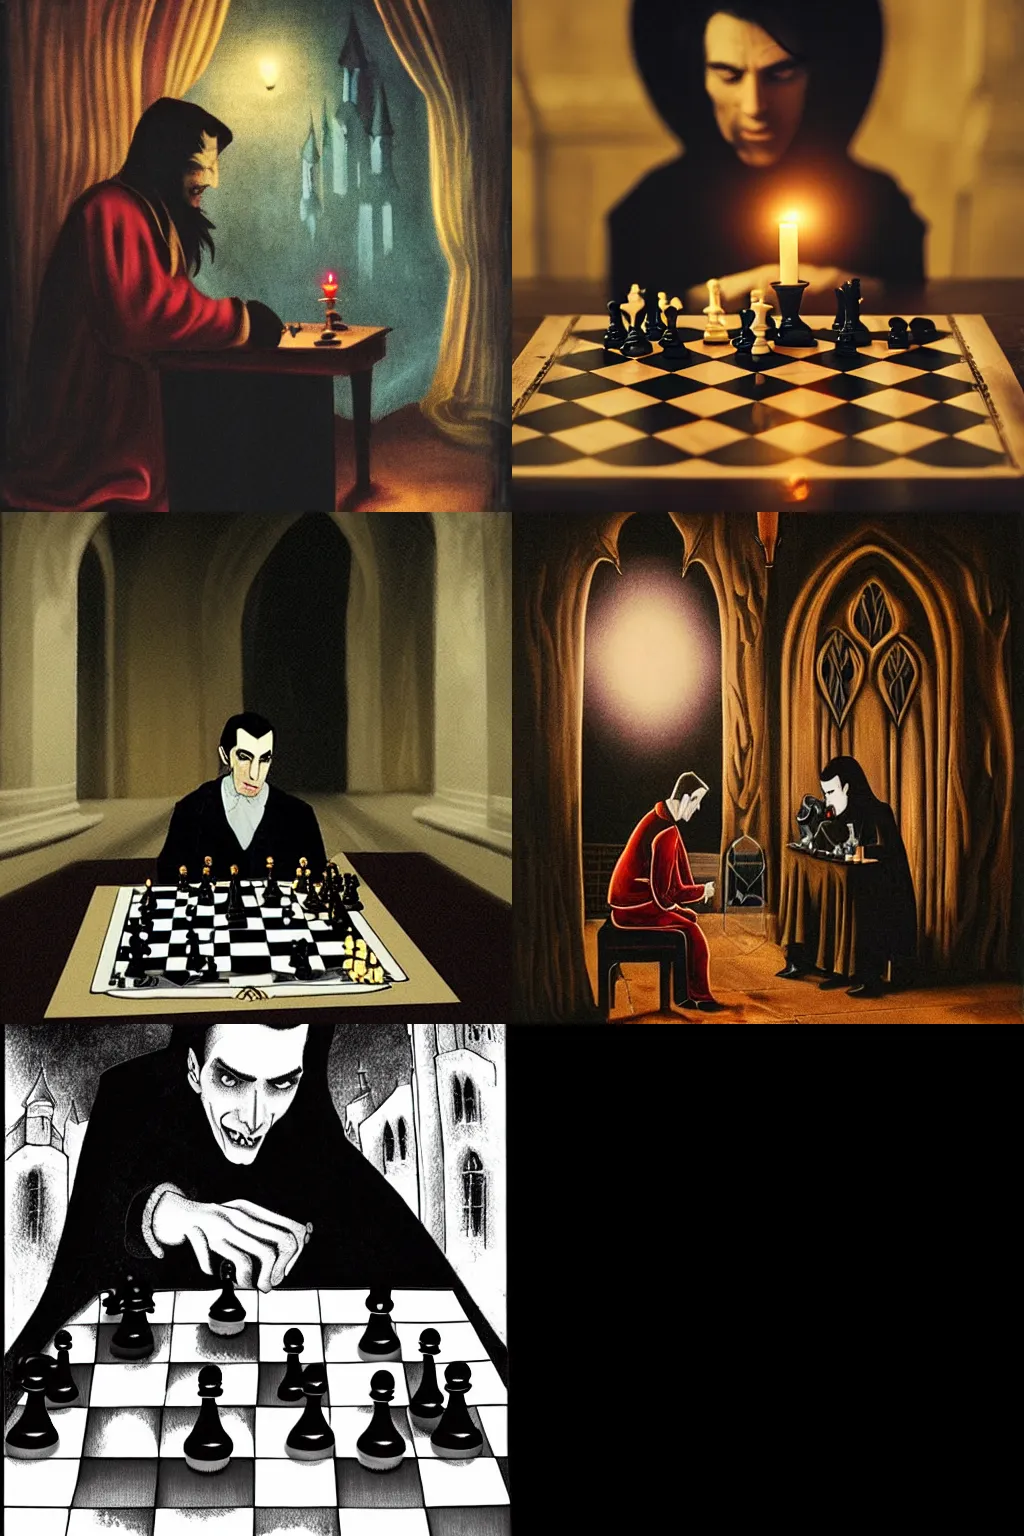 Prompt: count Dracula plays chess alone, melancolicly in a dark, gothic castle at candle light